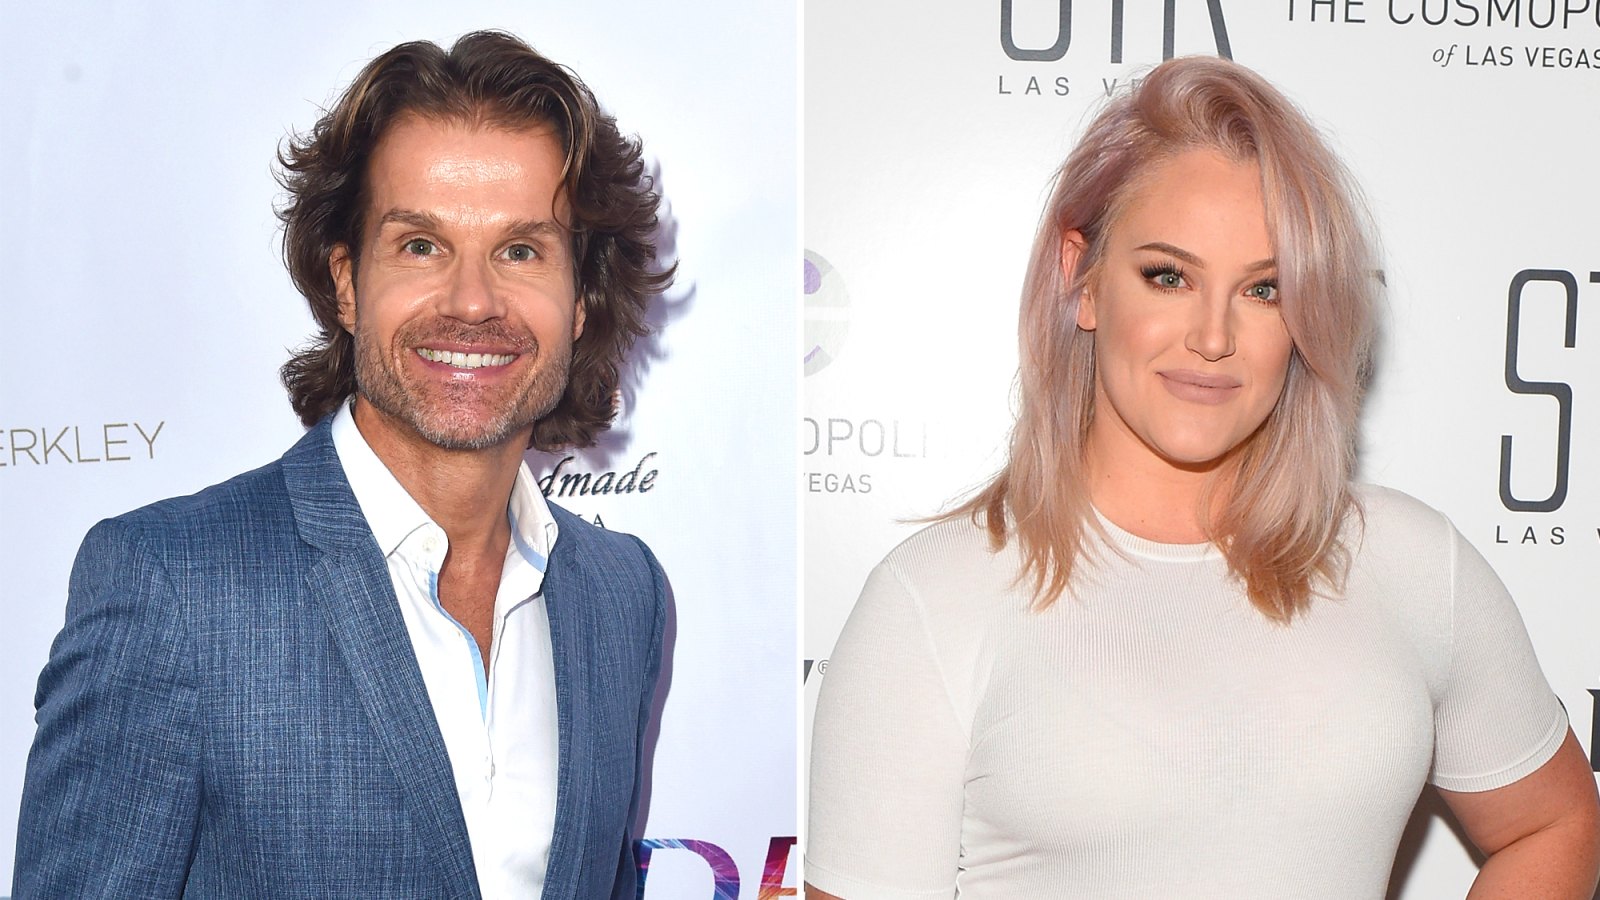 Dancing With the Stars Louis van Amstel Denies Body Shaming Costar Lacey Schwimmer